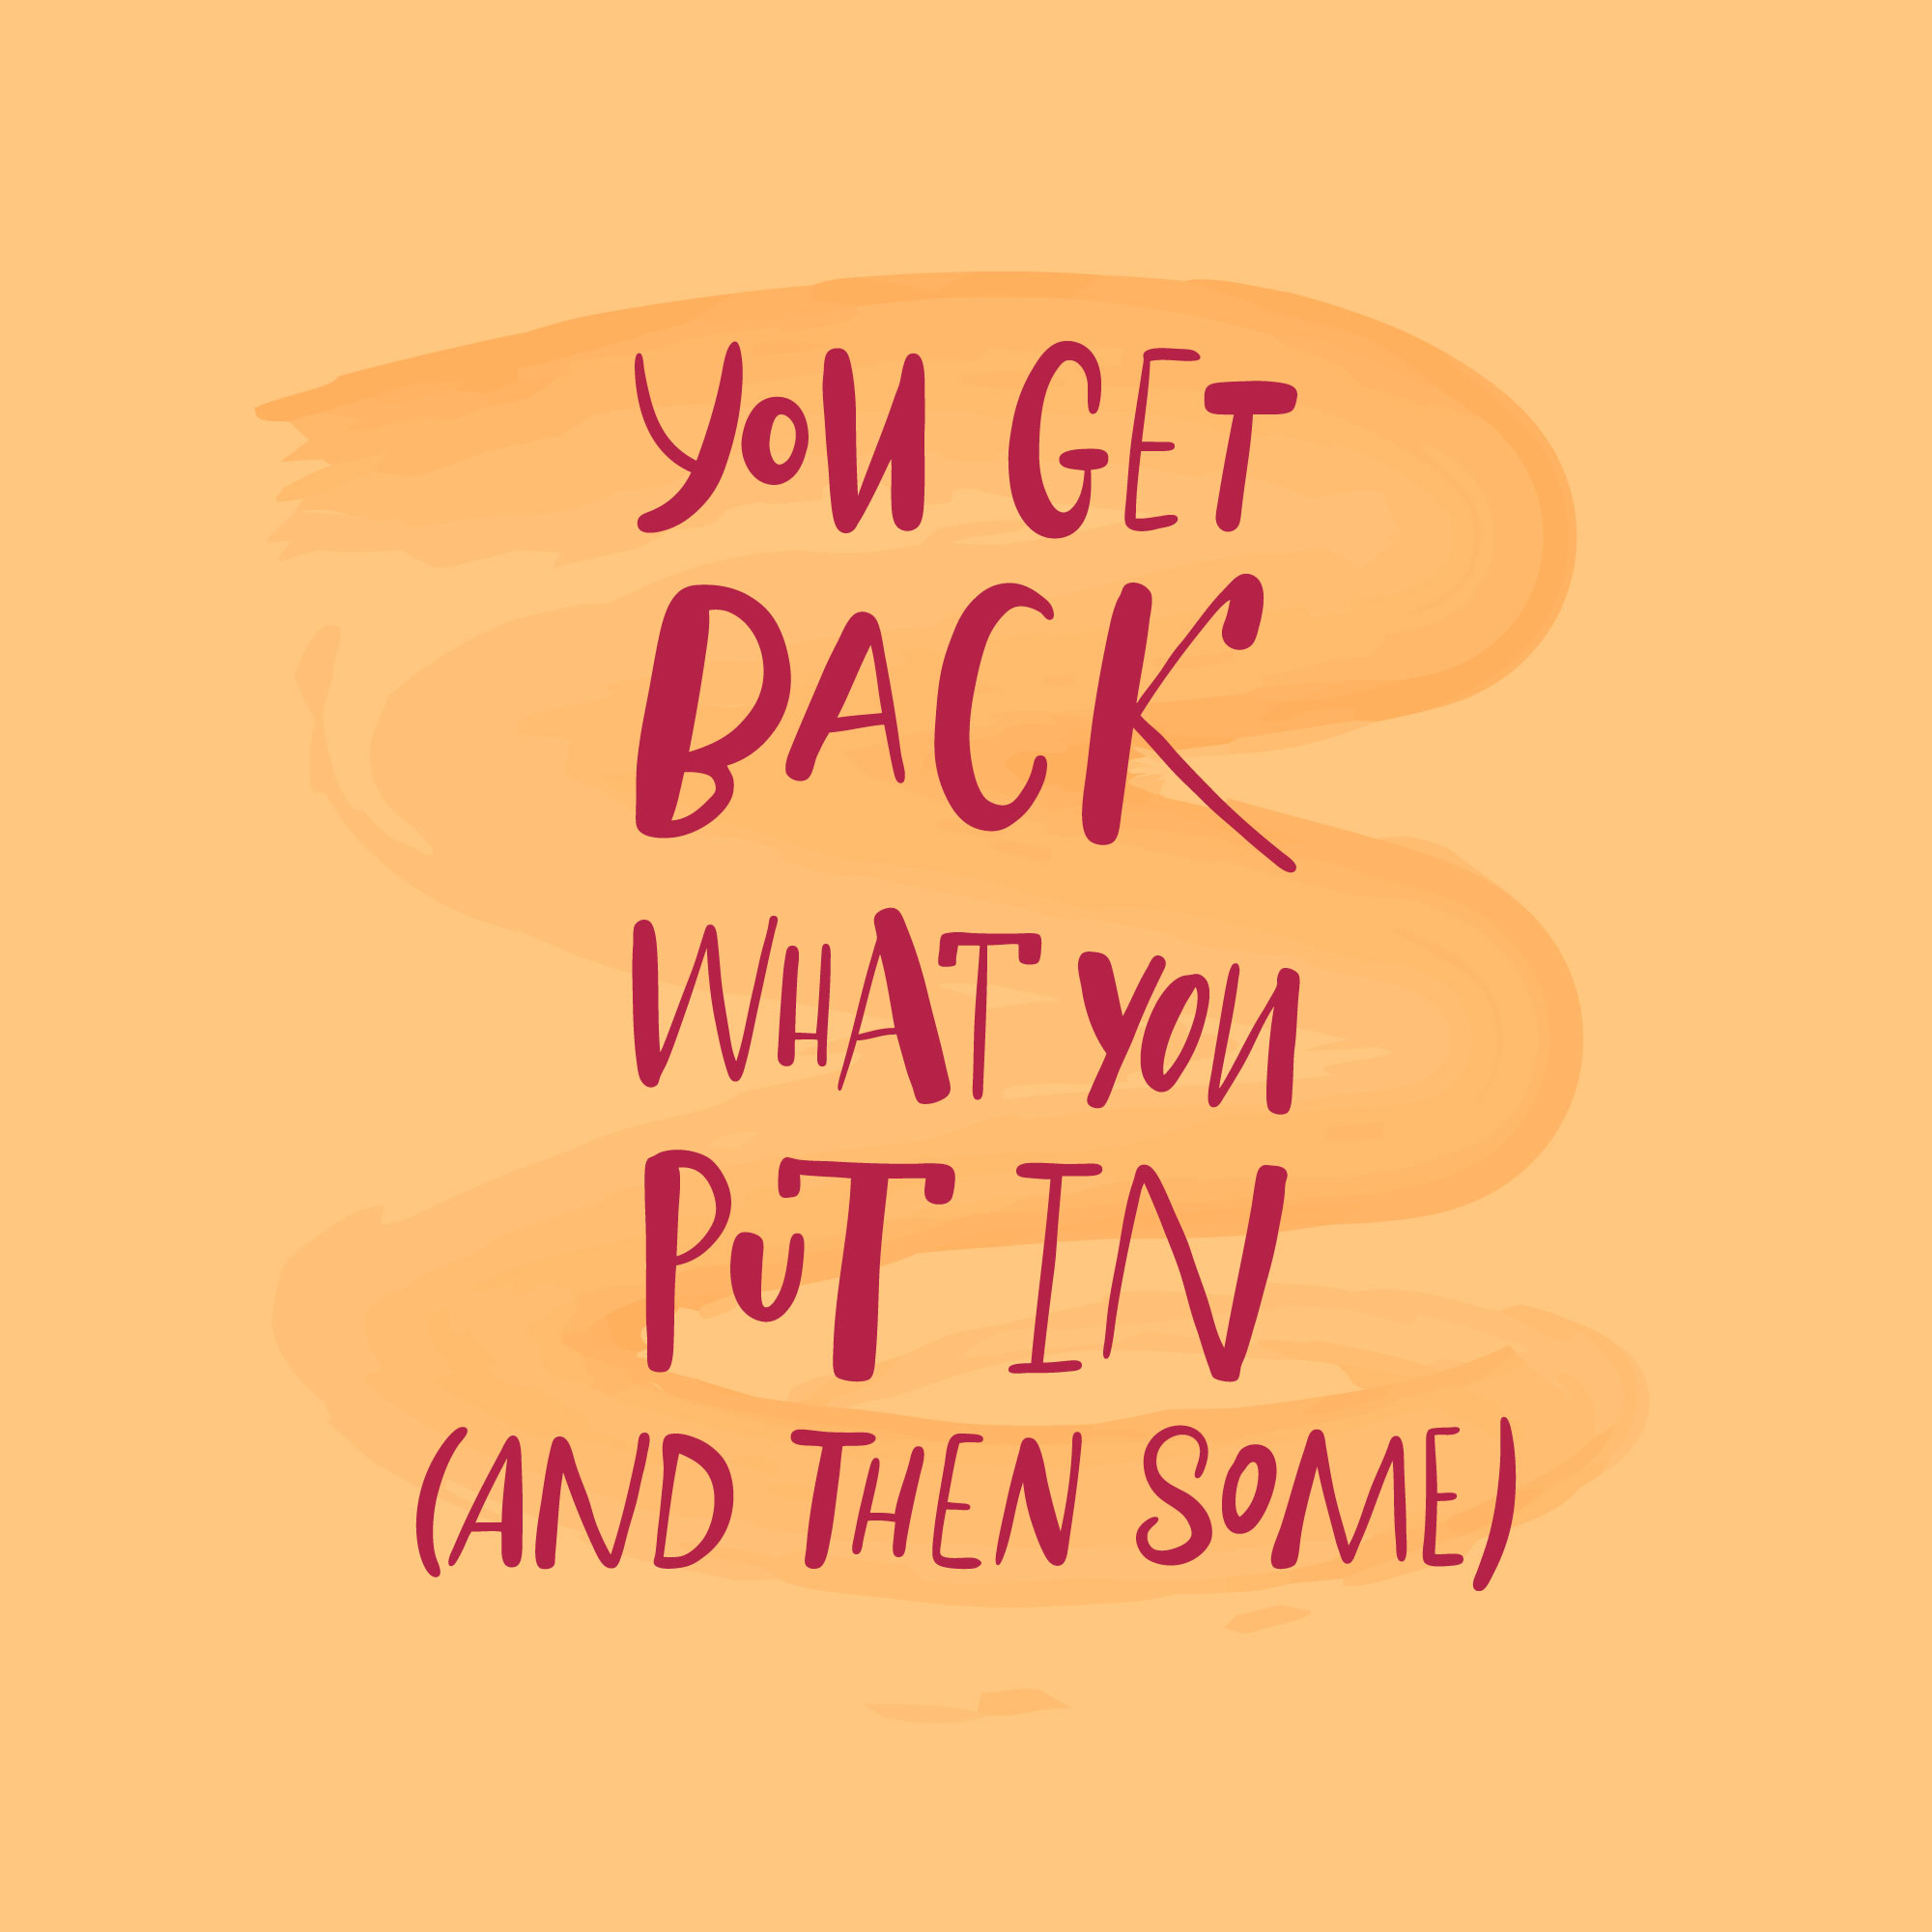 you get back what you put in (and then some)